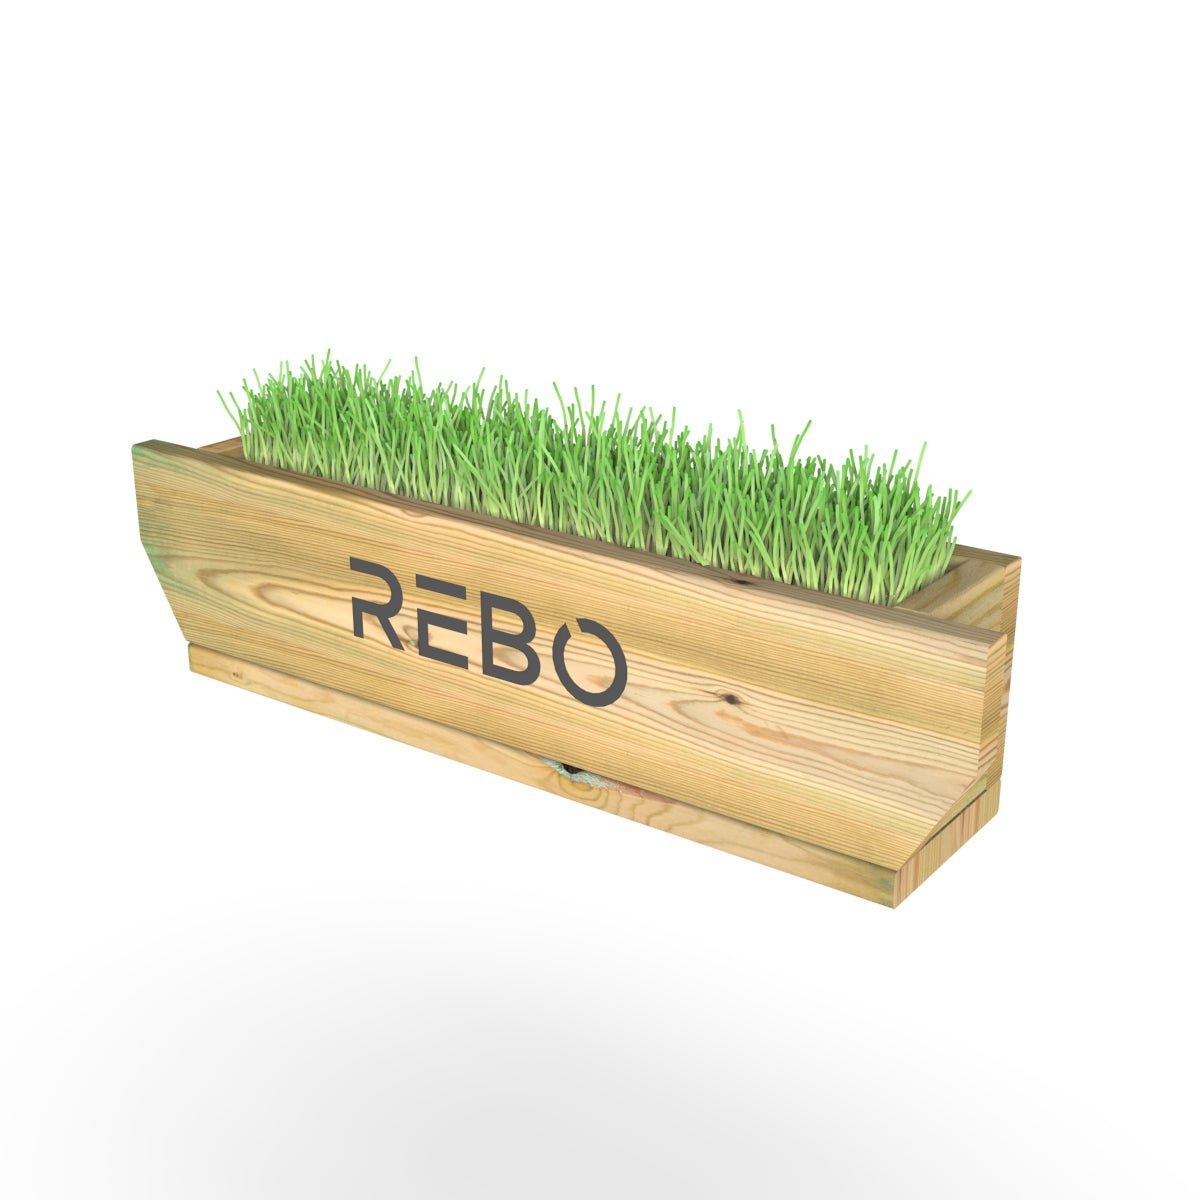 Rebo Orchard Playhouse Wooden Planter